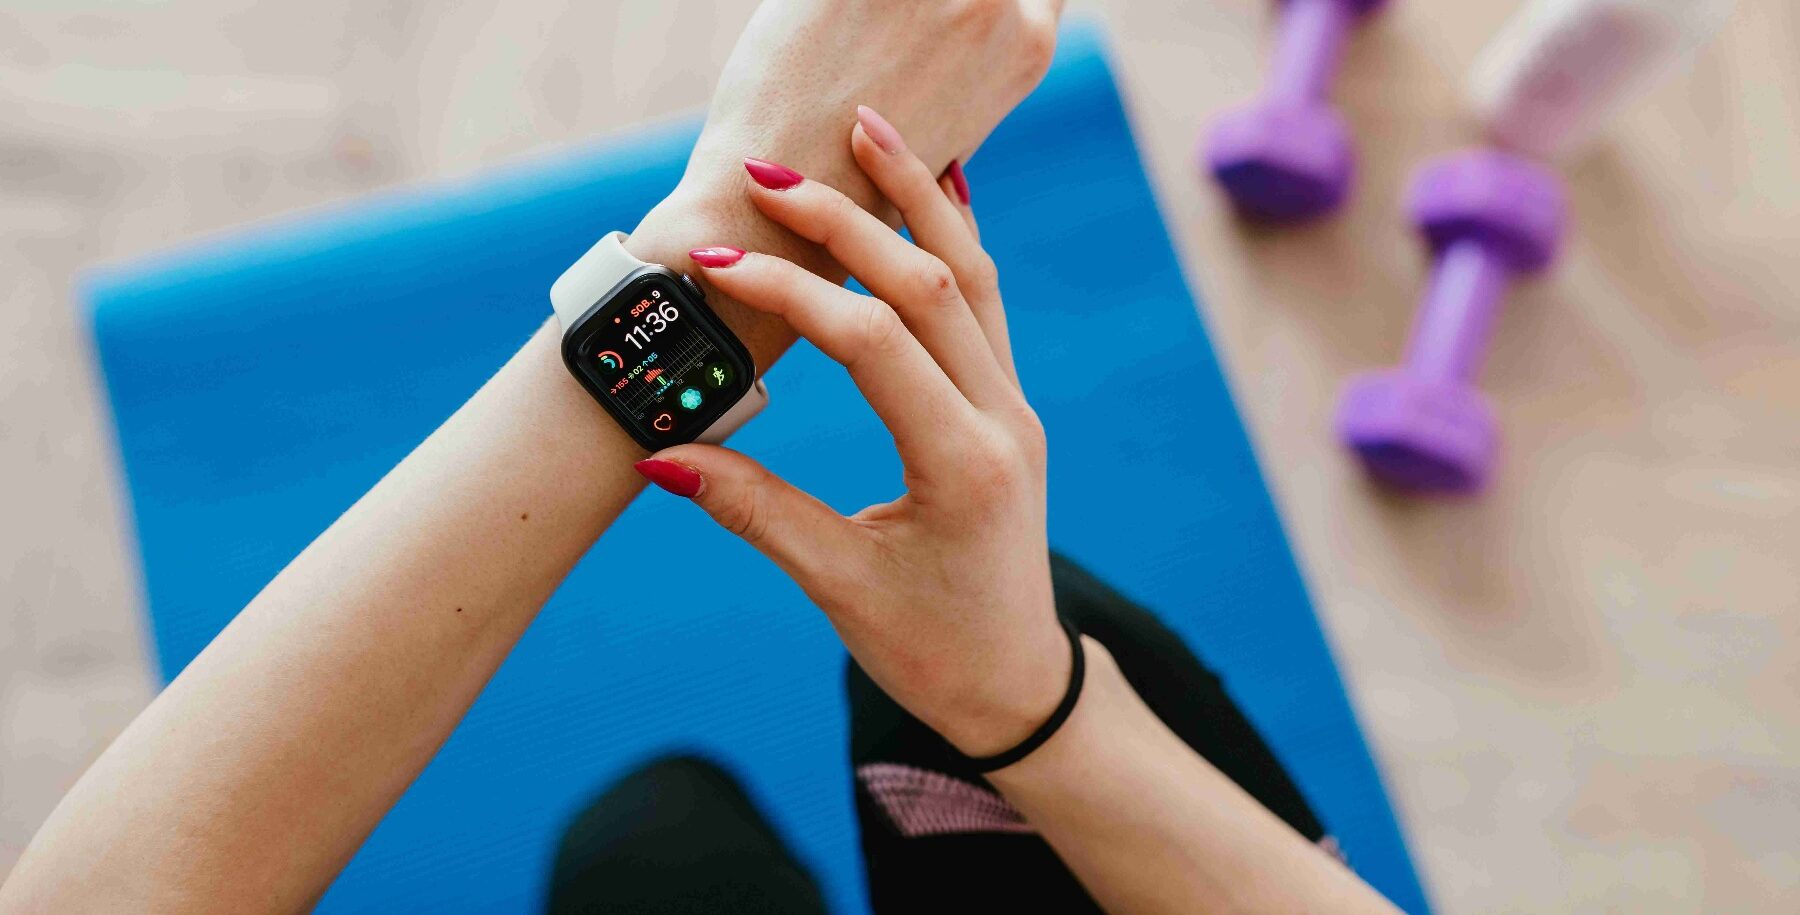 Fitness Trackers - Home workout challenges